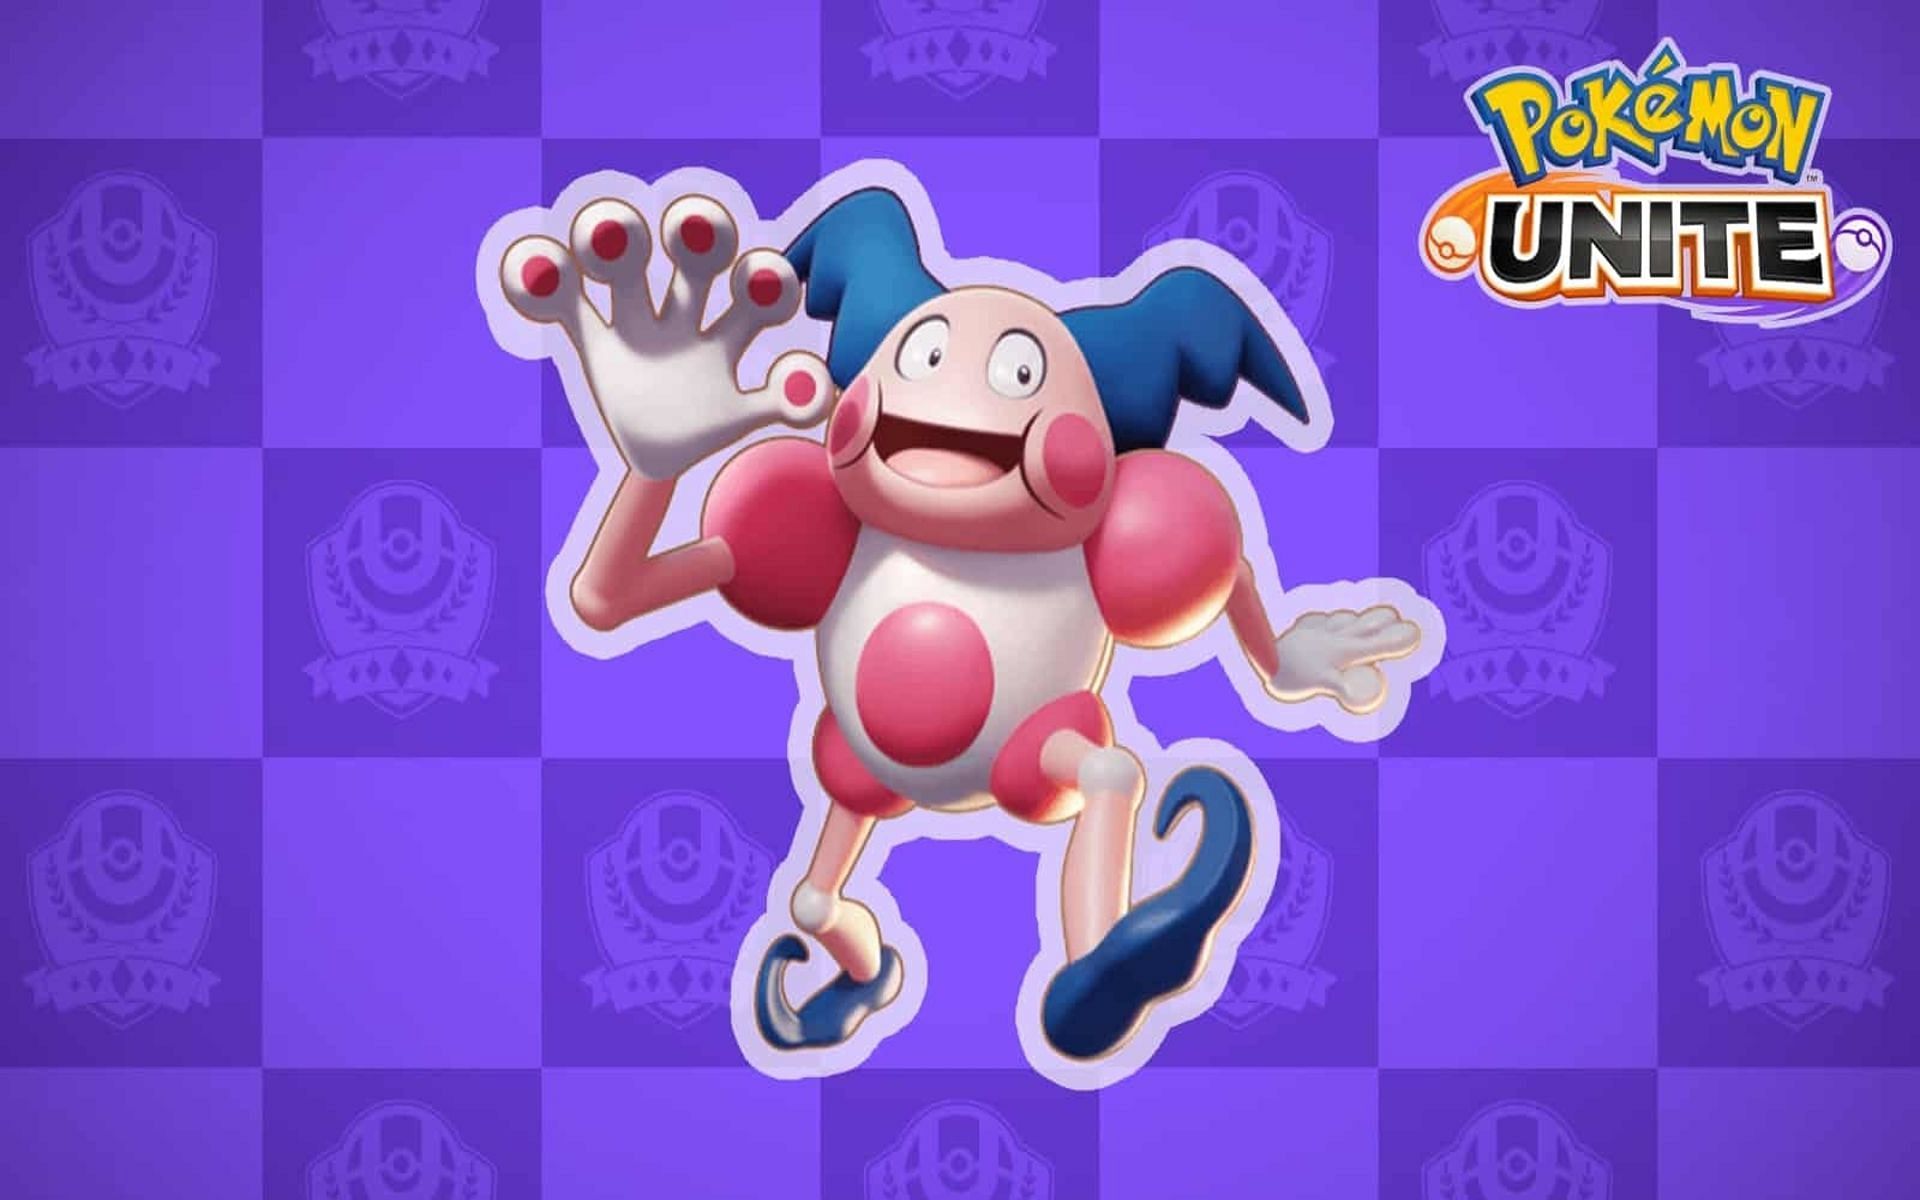 Mr. Mime is a Psychic and Fairy-type Pokemon (Image via TiMi Studios)